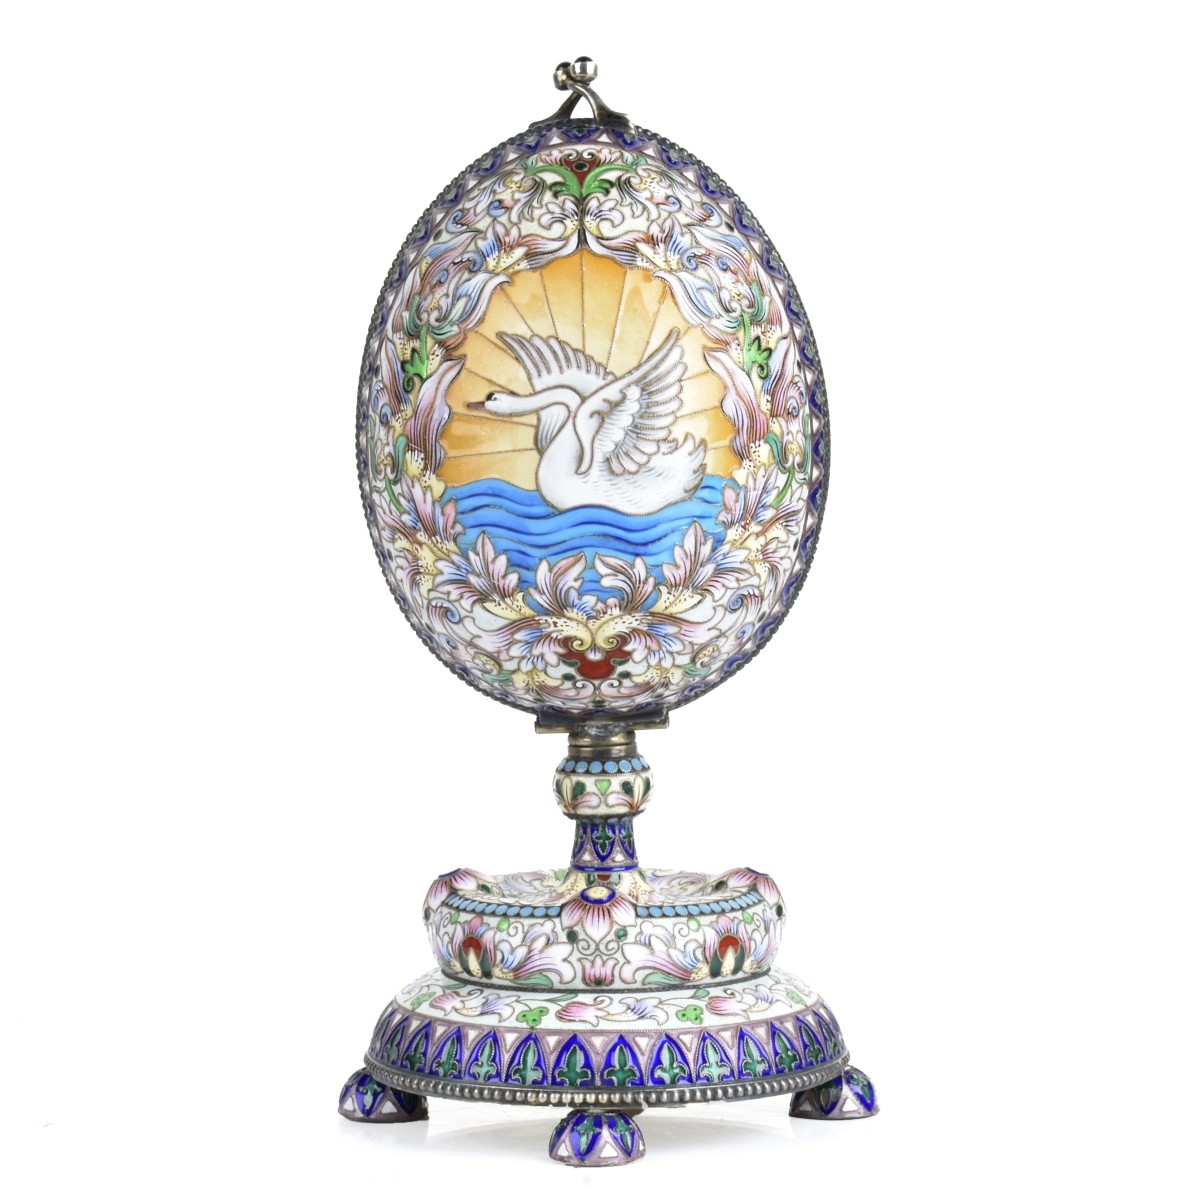 Russian Enamel Silver Gilt Egg on Stand